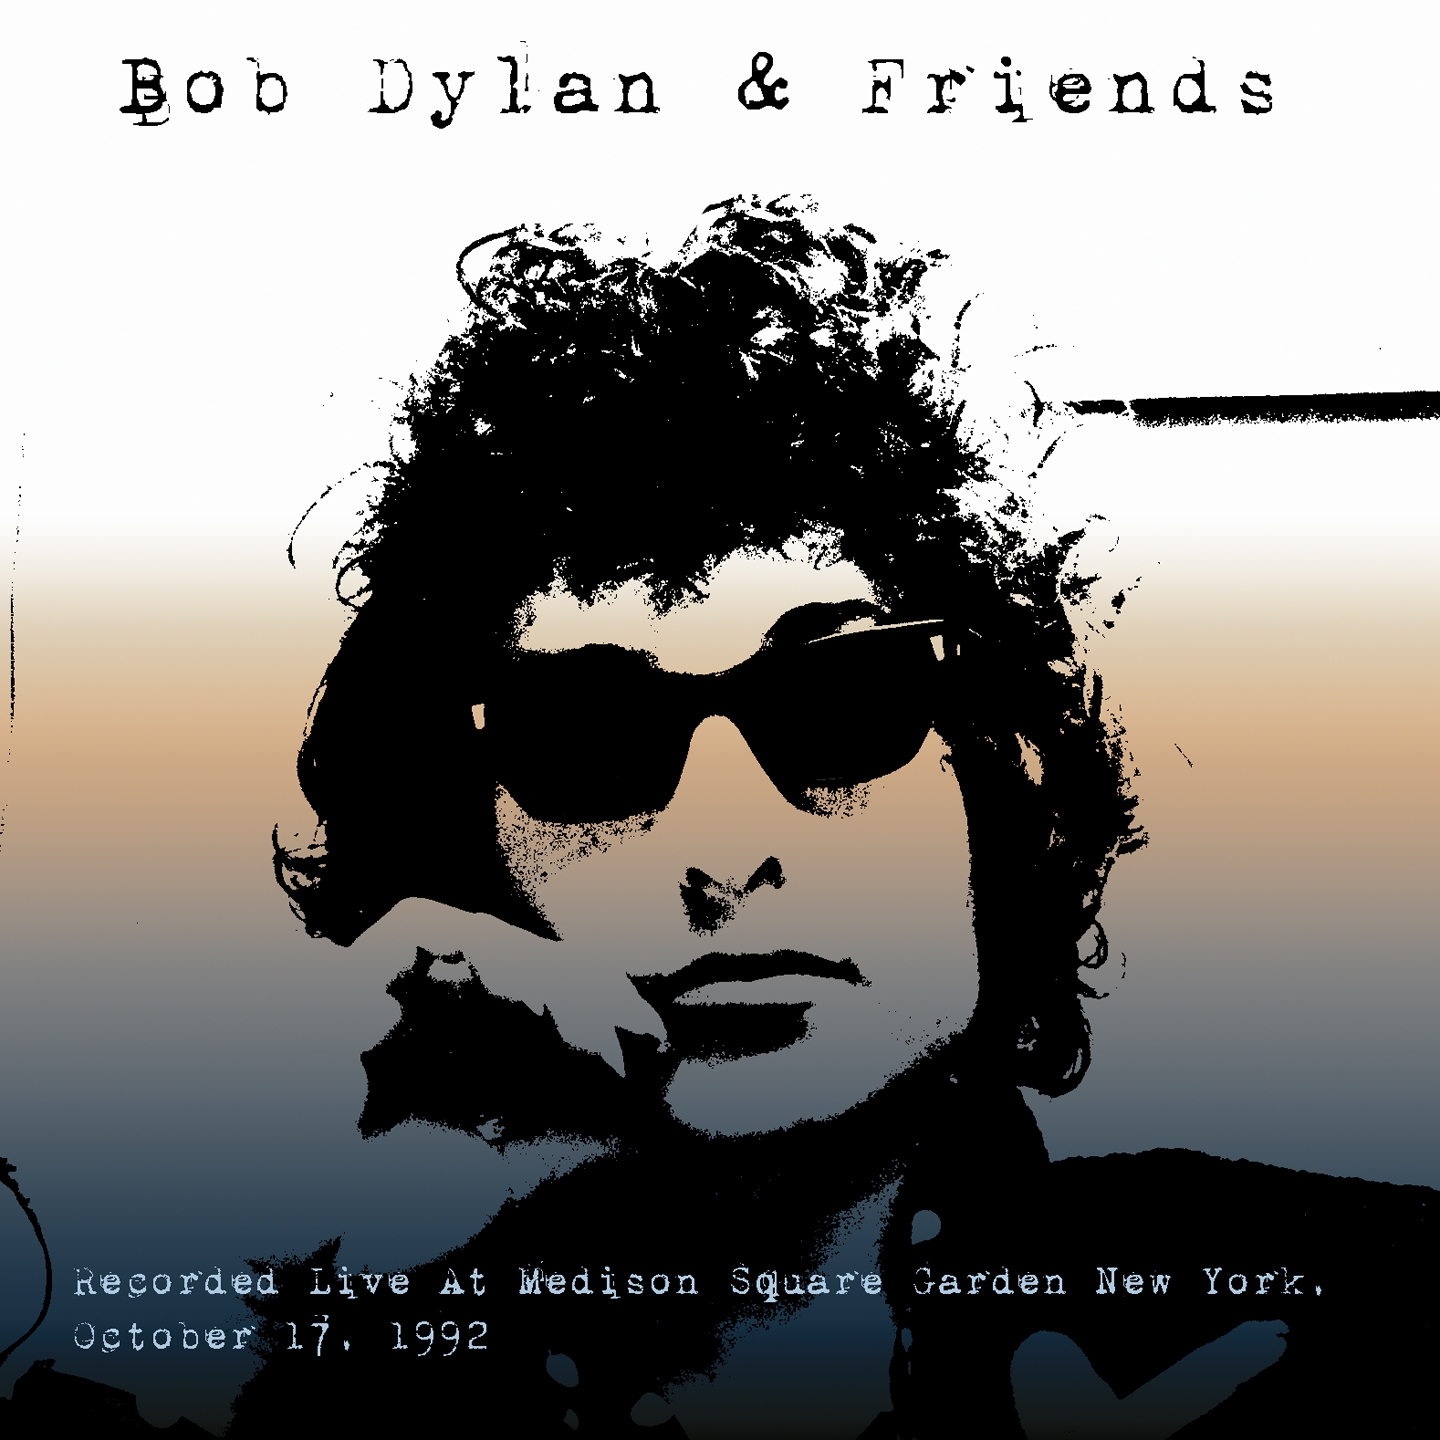 Bob Dylan & Friends: Recorded Live At Medison Square Garden New York, October 17, 1992